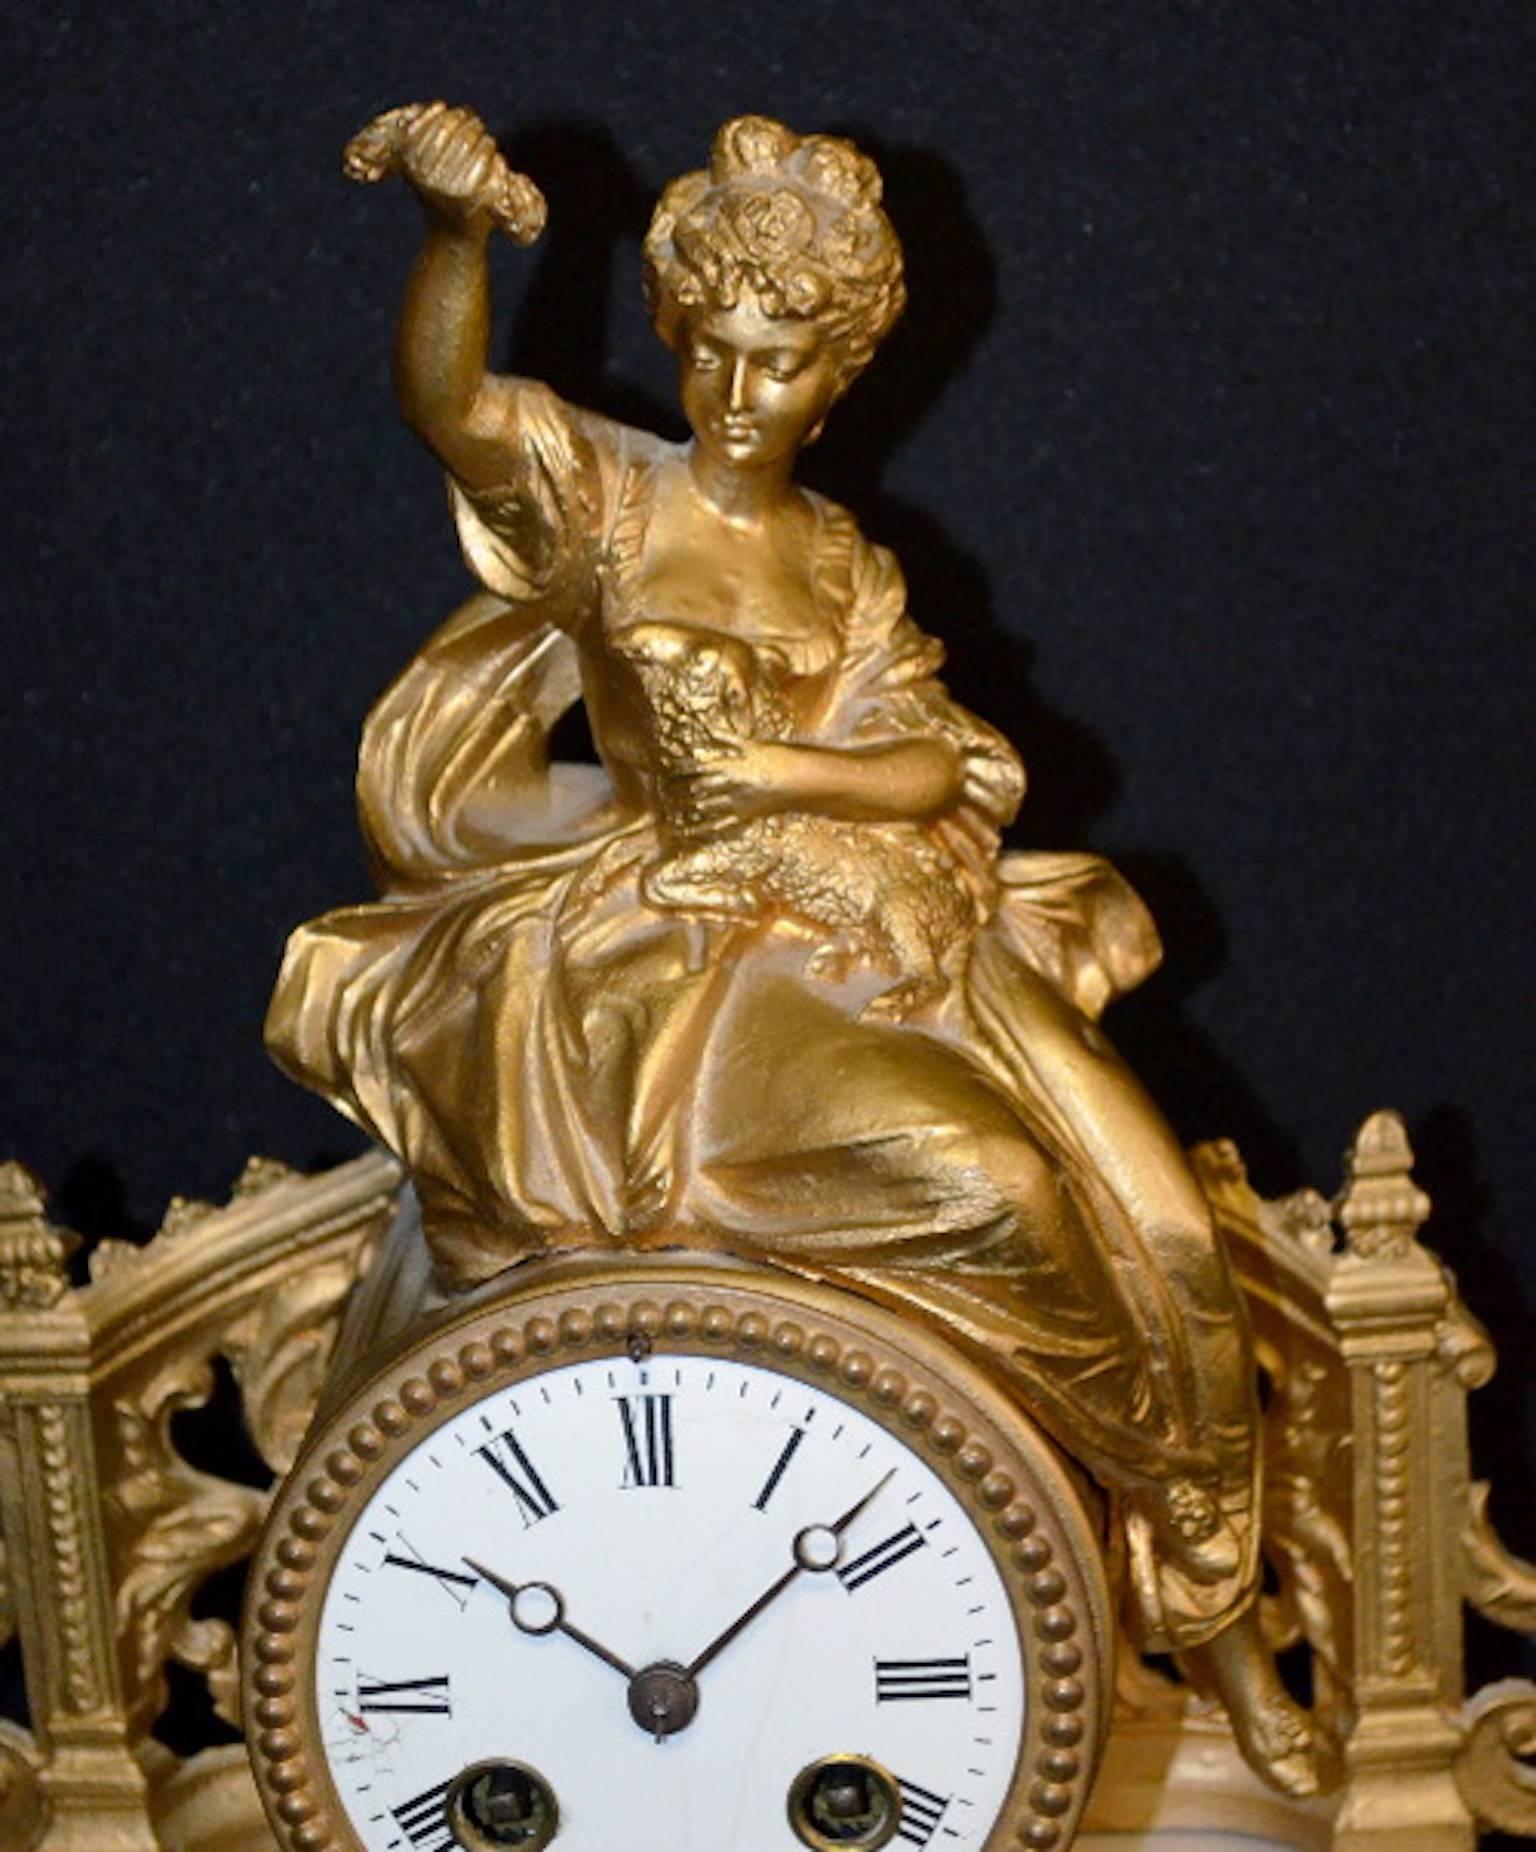 Antique French Japy Freres Alabaster statue clock: T & S with a porcelain dial. The movement is marked "Japy Freres" "G.R." in an oval and numbered 3062. The clock has the pendulum and key with it. The metal statue is of a